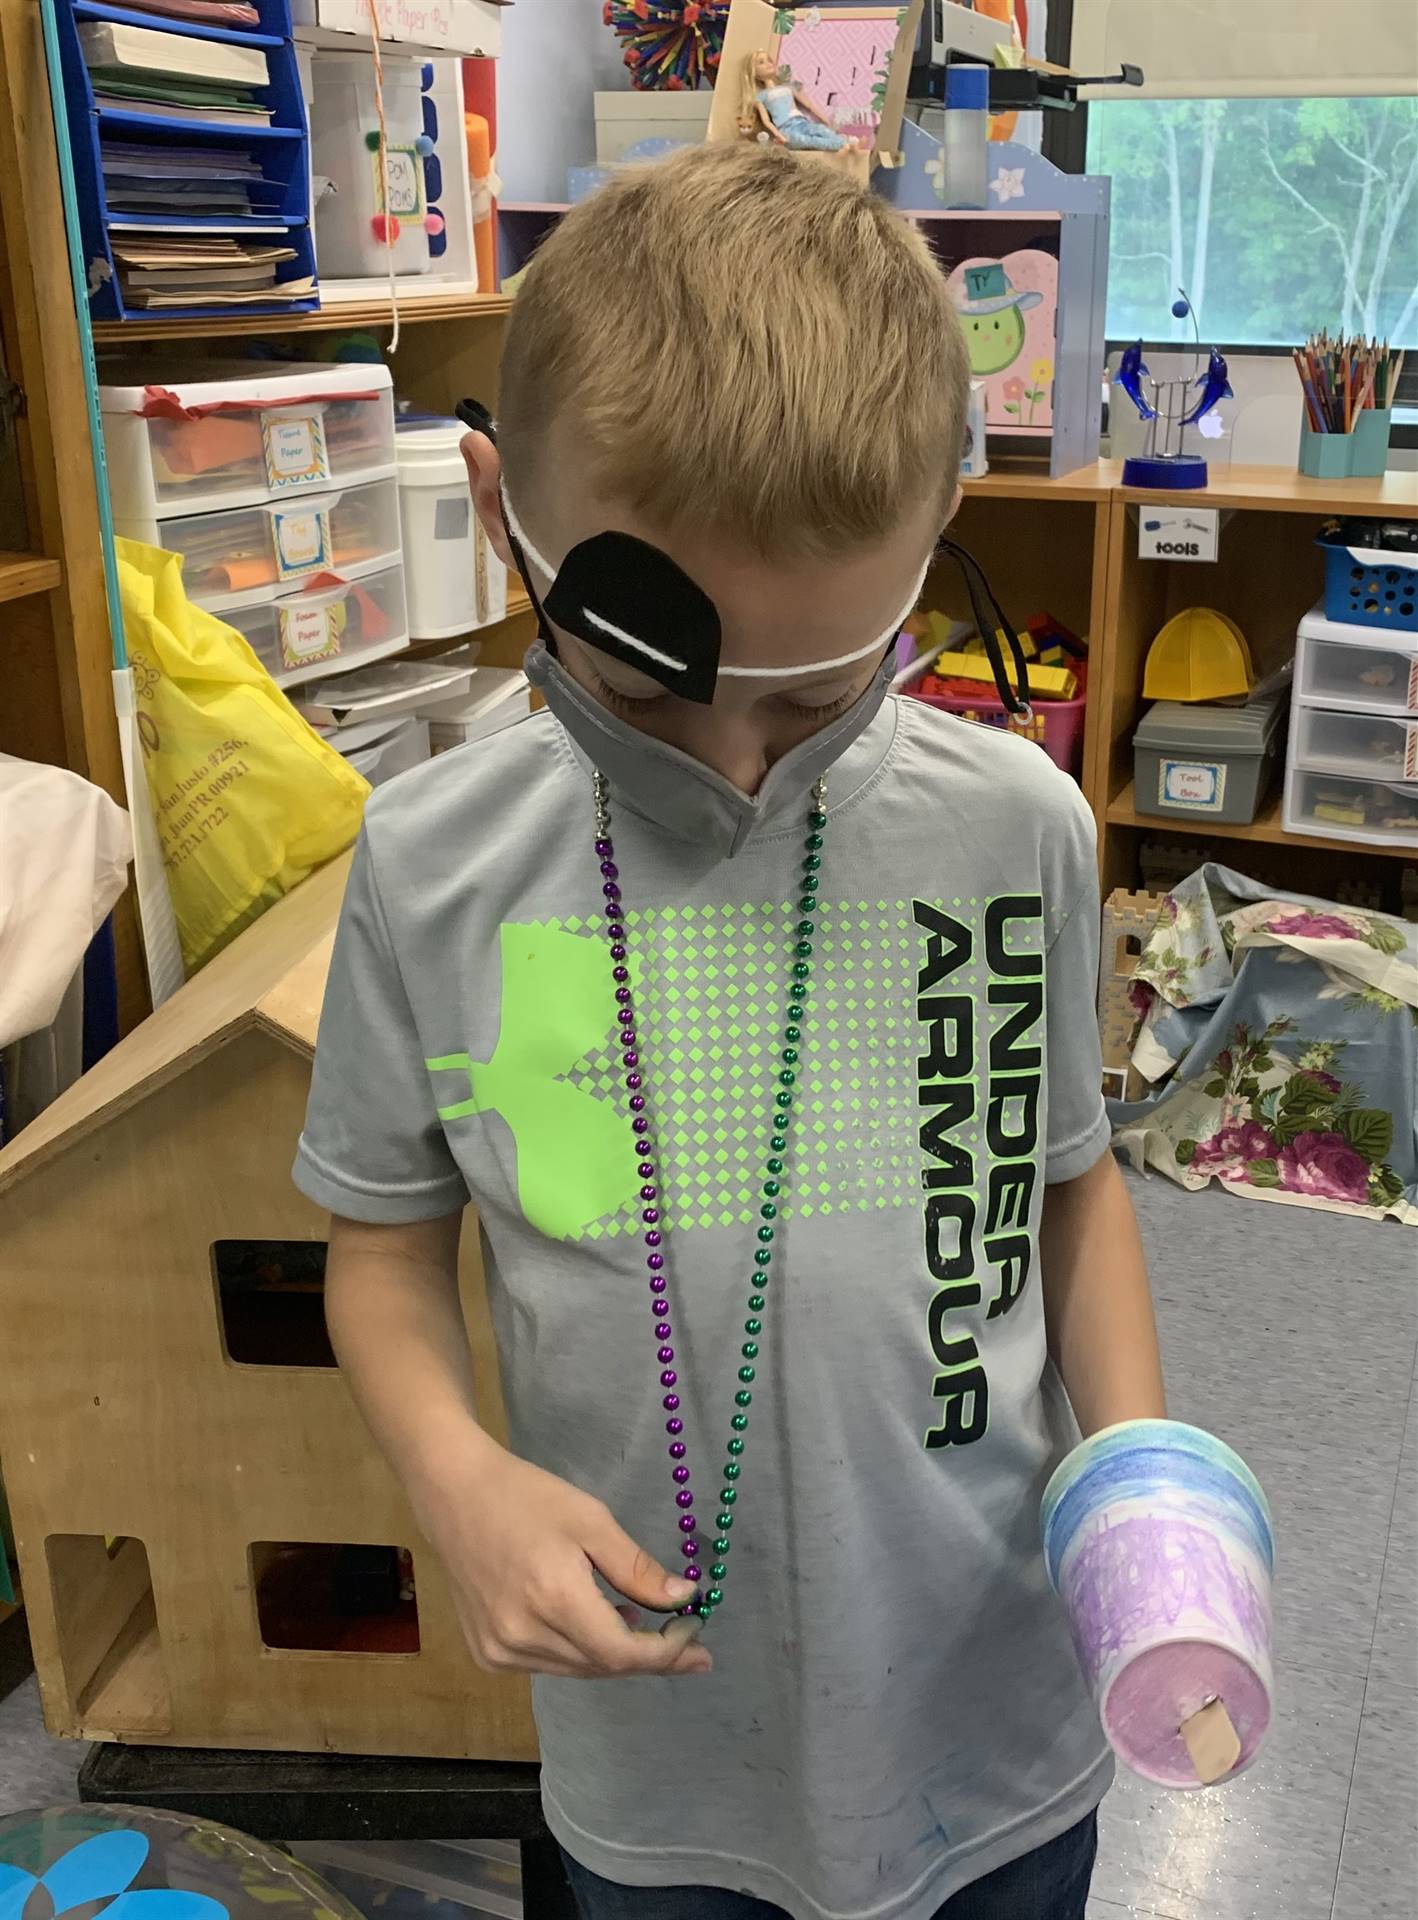 a student pirate shows off treasure and a "claw" hook hand.